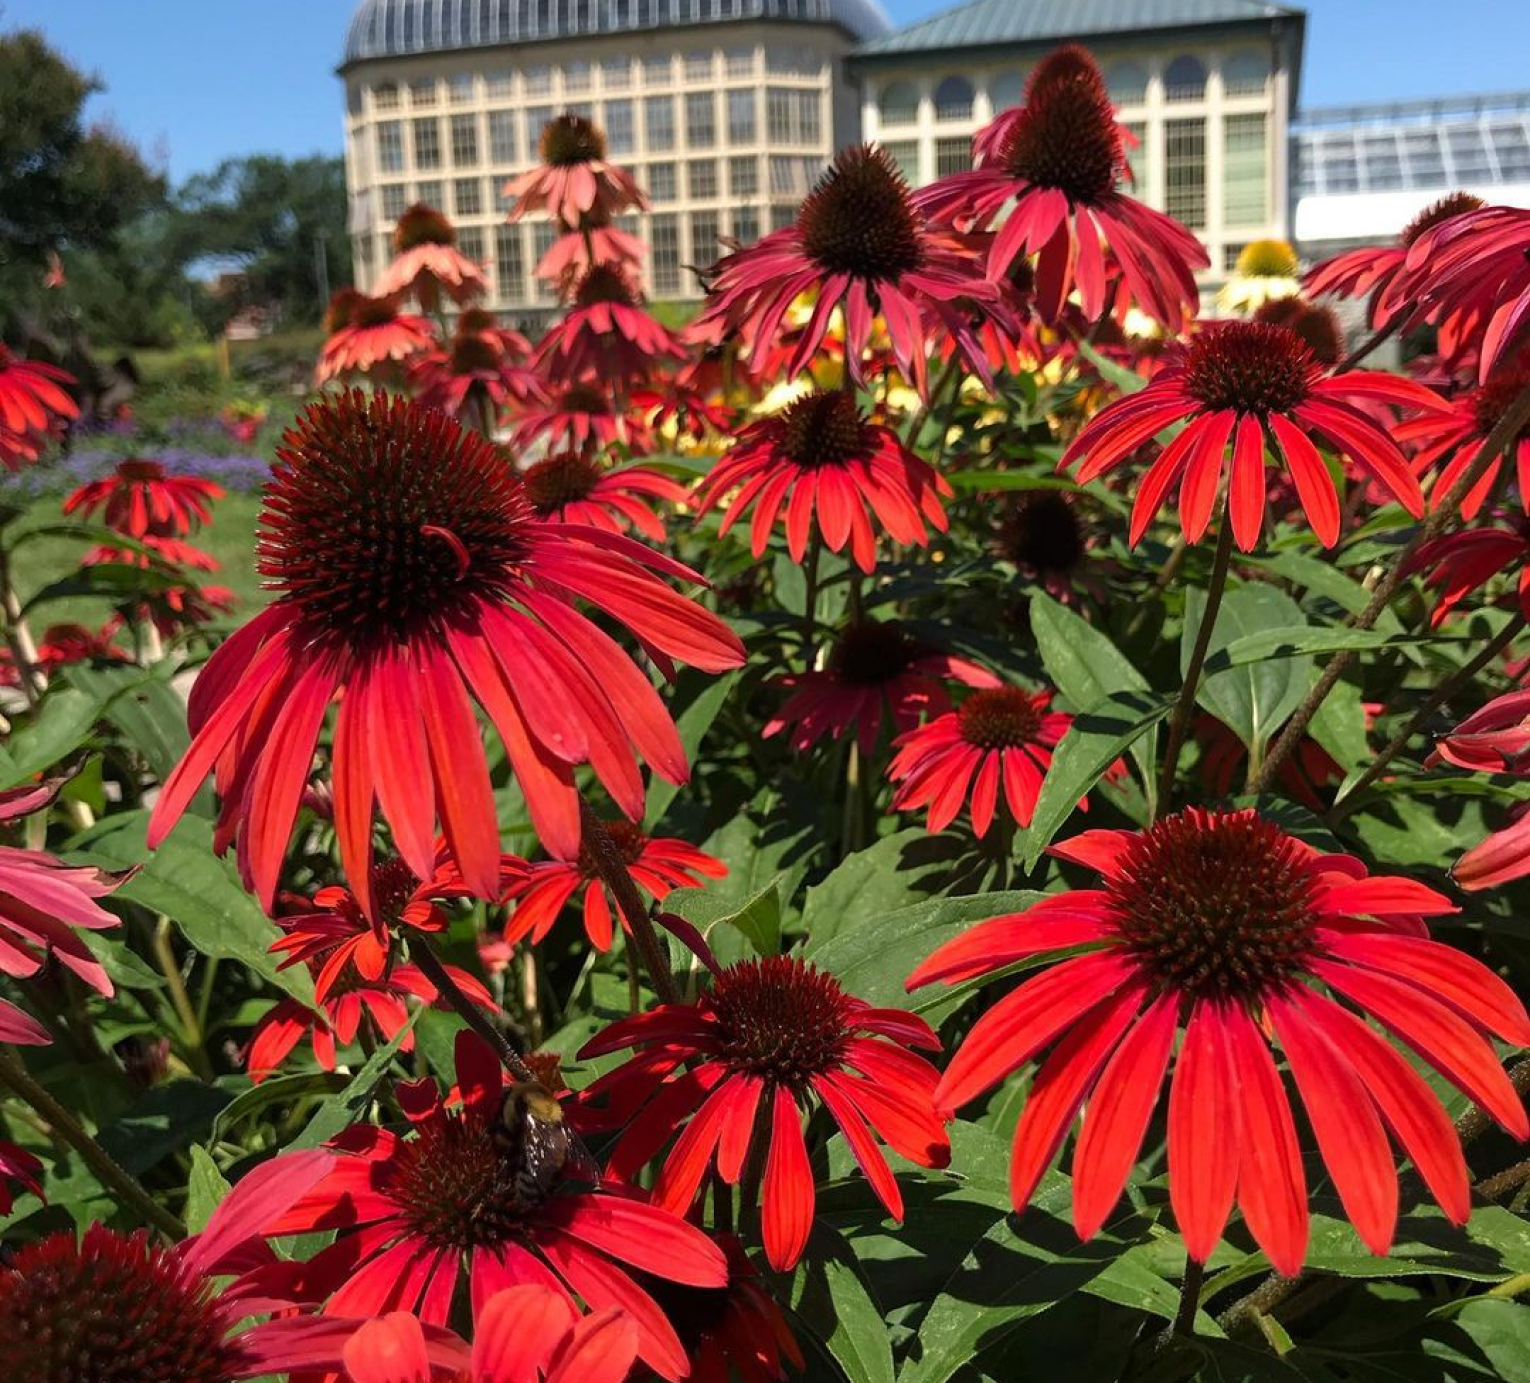 An outdoor bed full of red coneflowers on a sunny day